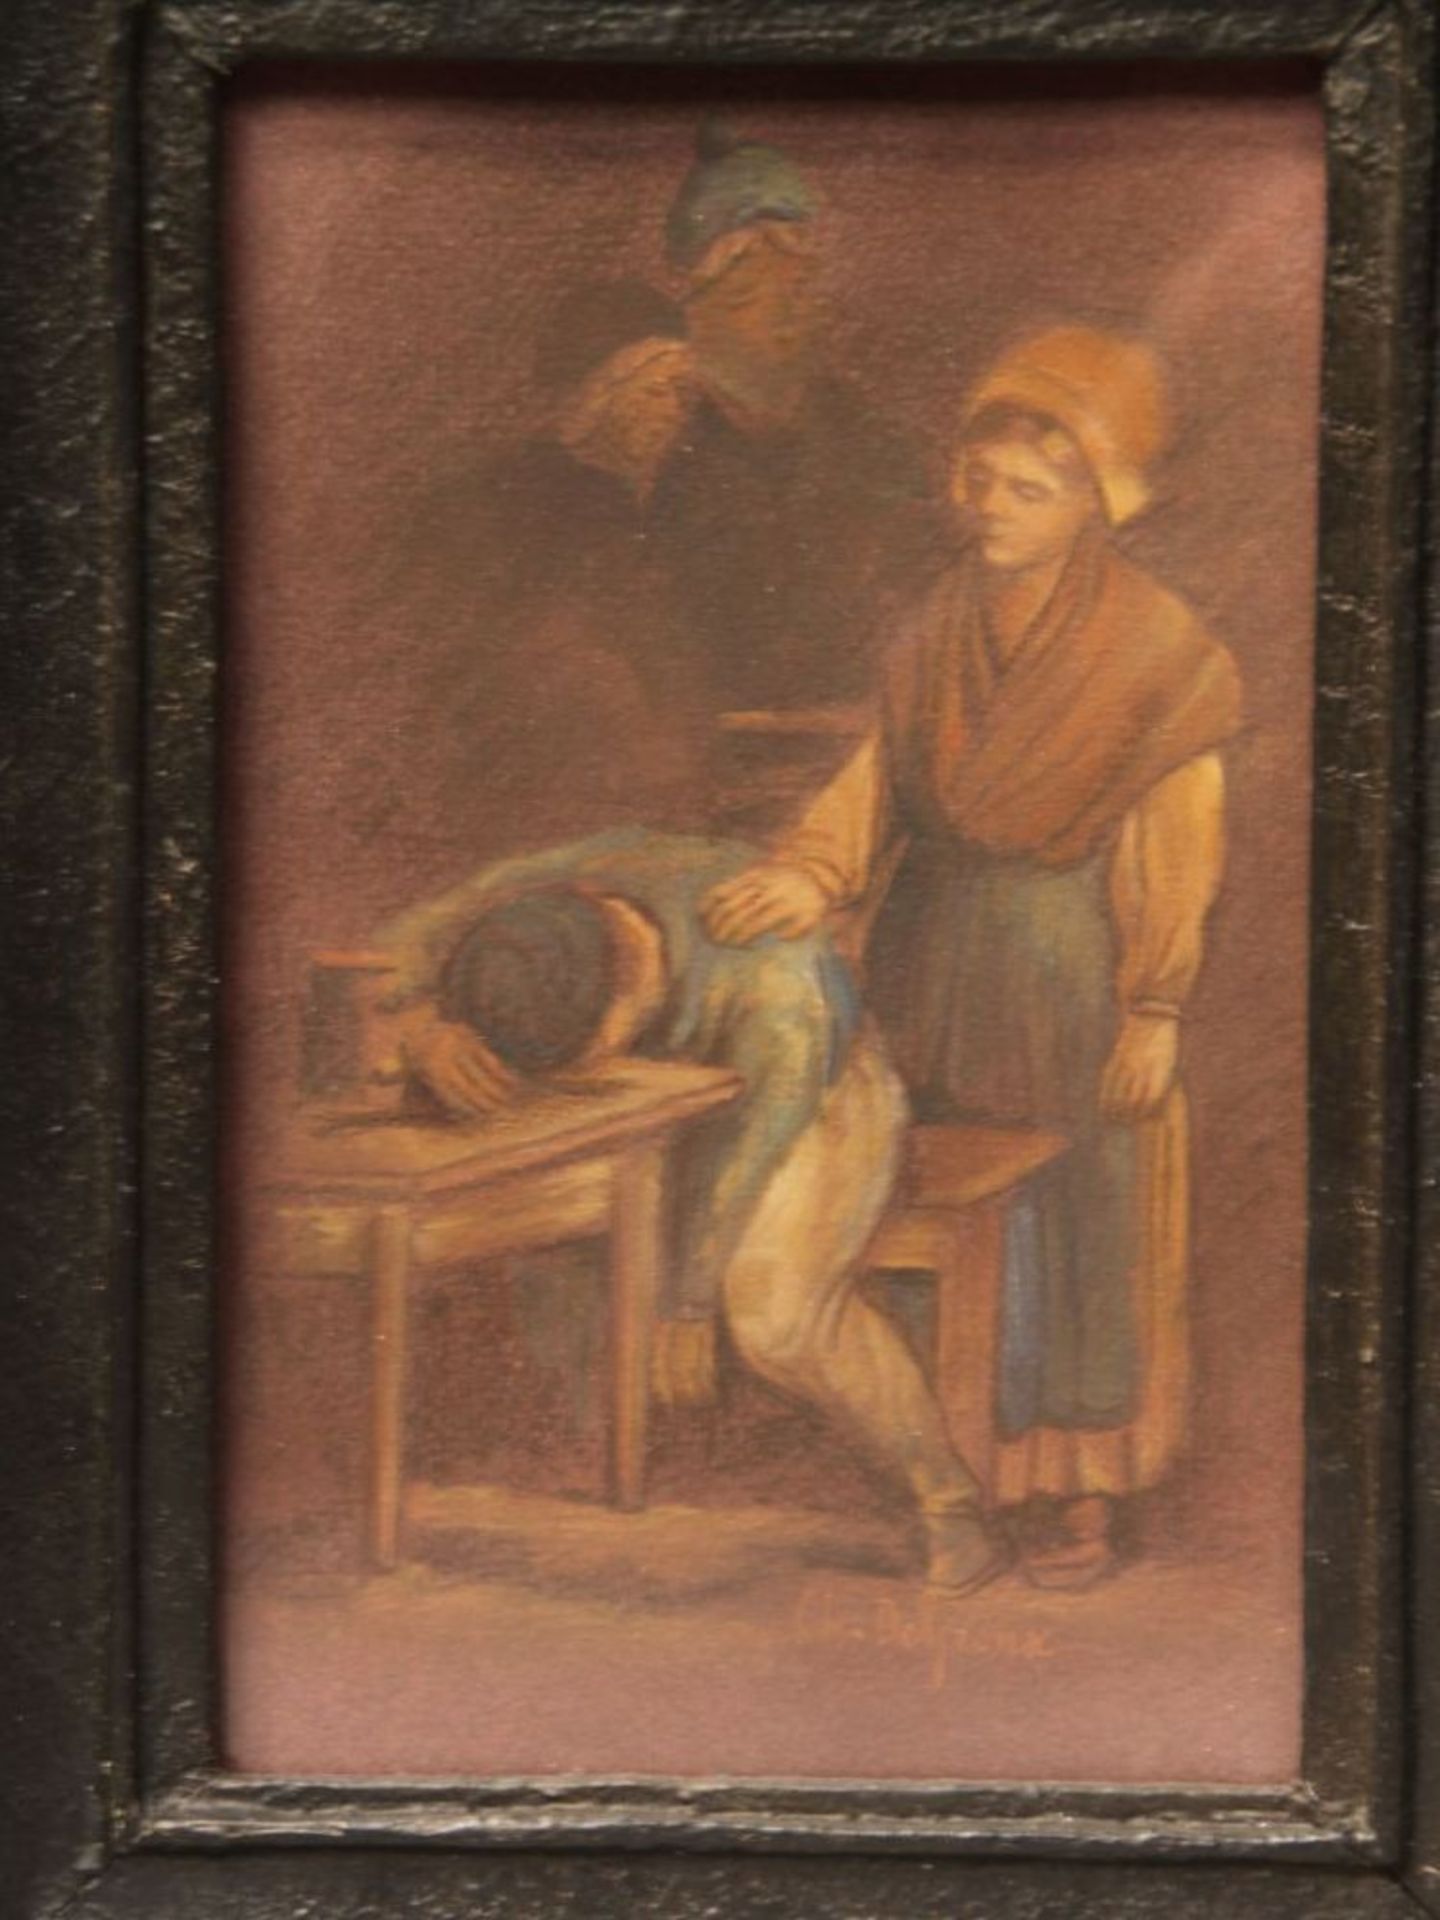 Deliroux (???), Ch. - possibly 19th century - The drunken father in the tavern, pastel, signed lower